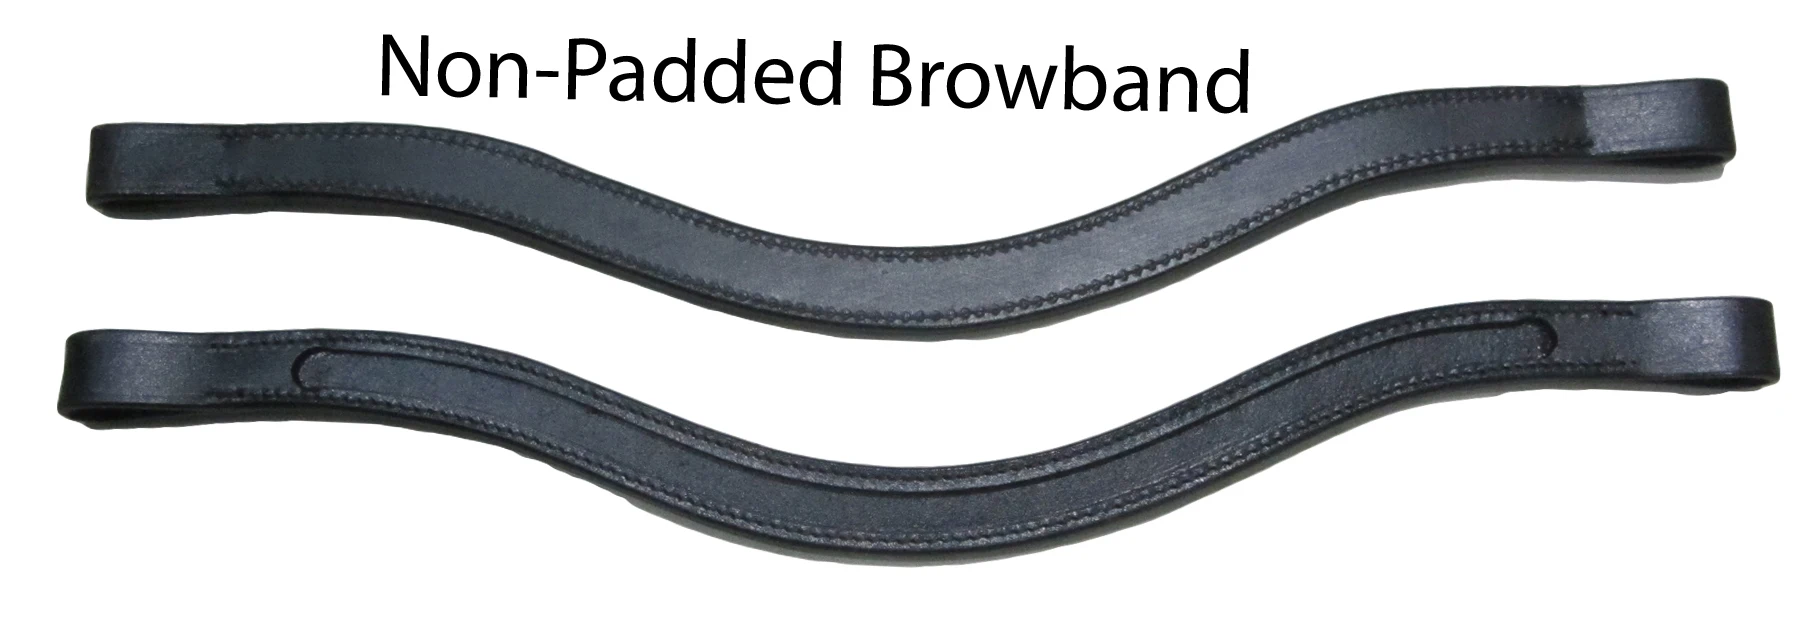 V SHAPE BLACK HIGH QUALITY GENUINE LEATHER EMPTY CHANNEL BROWBAND *16"INCH